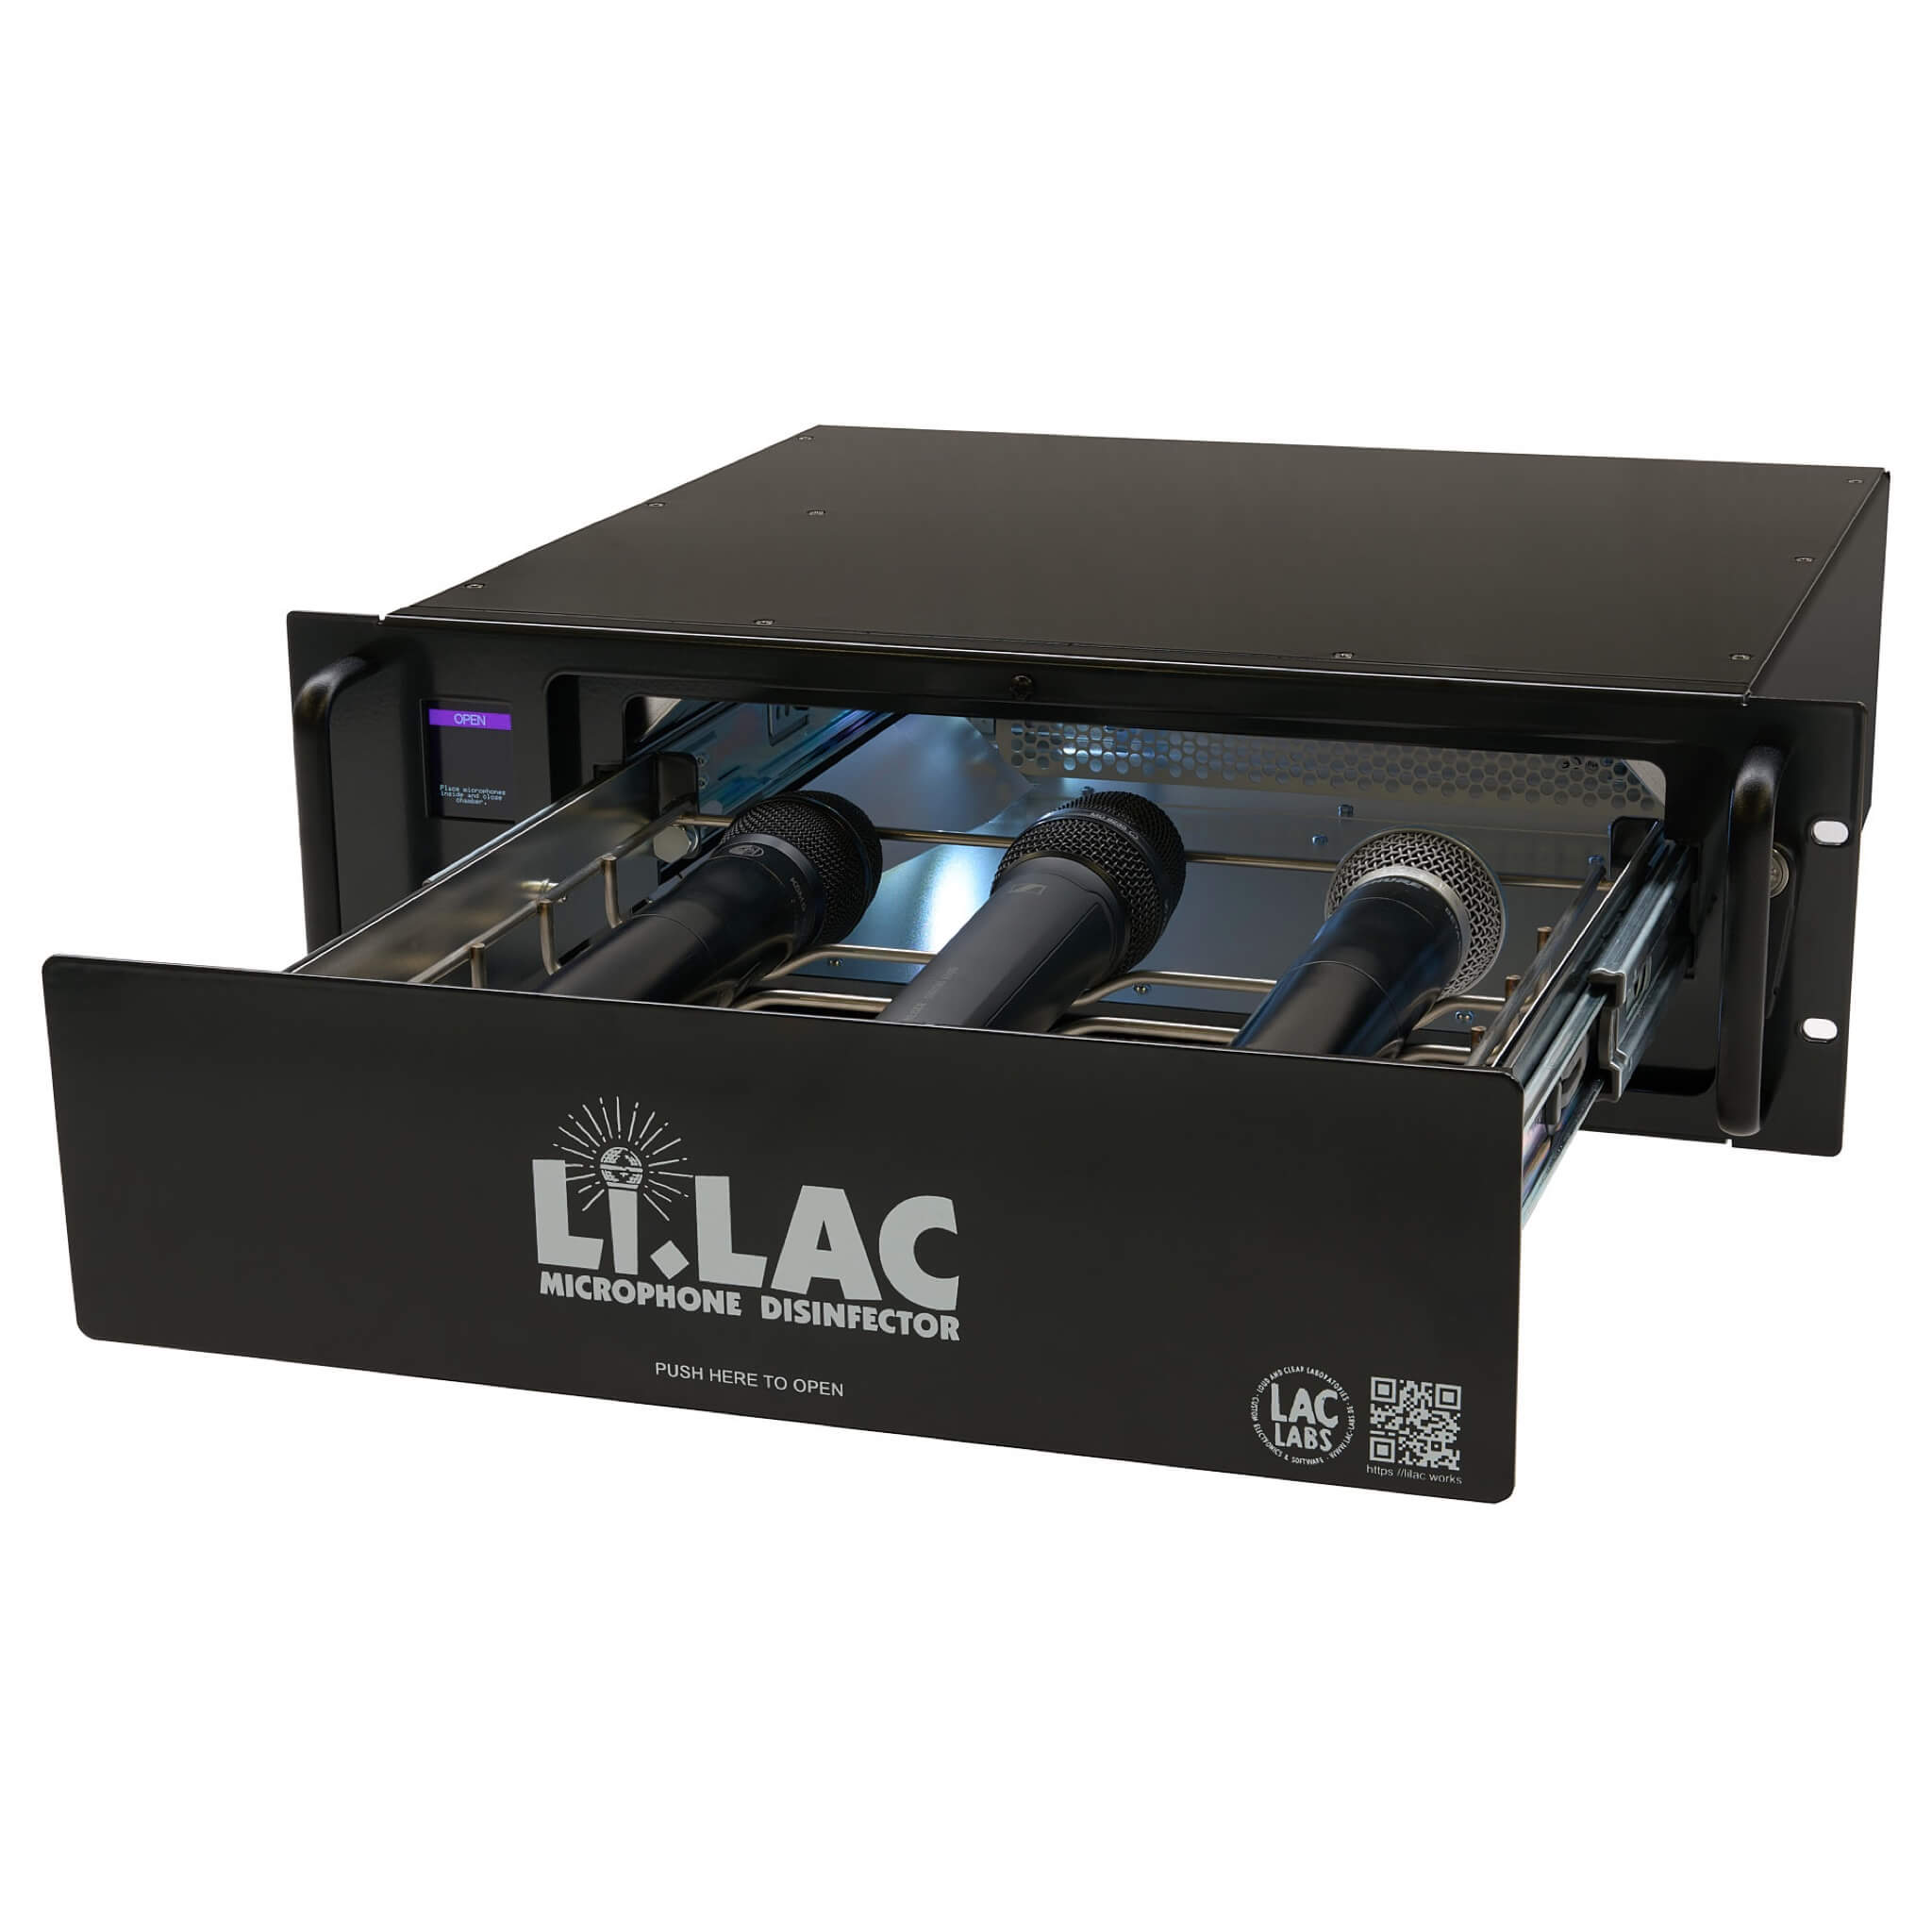 Li.LAC - Microphone Disinfection System, open